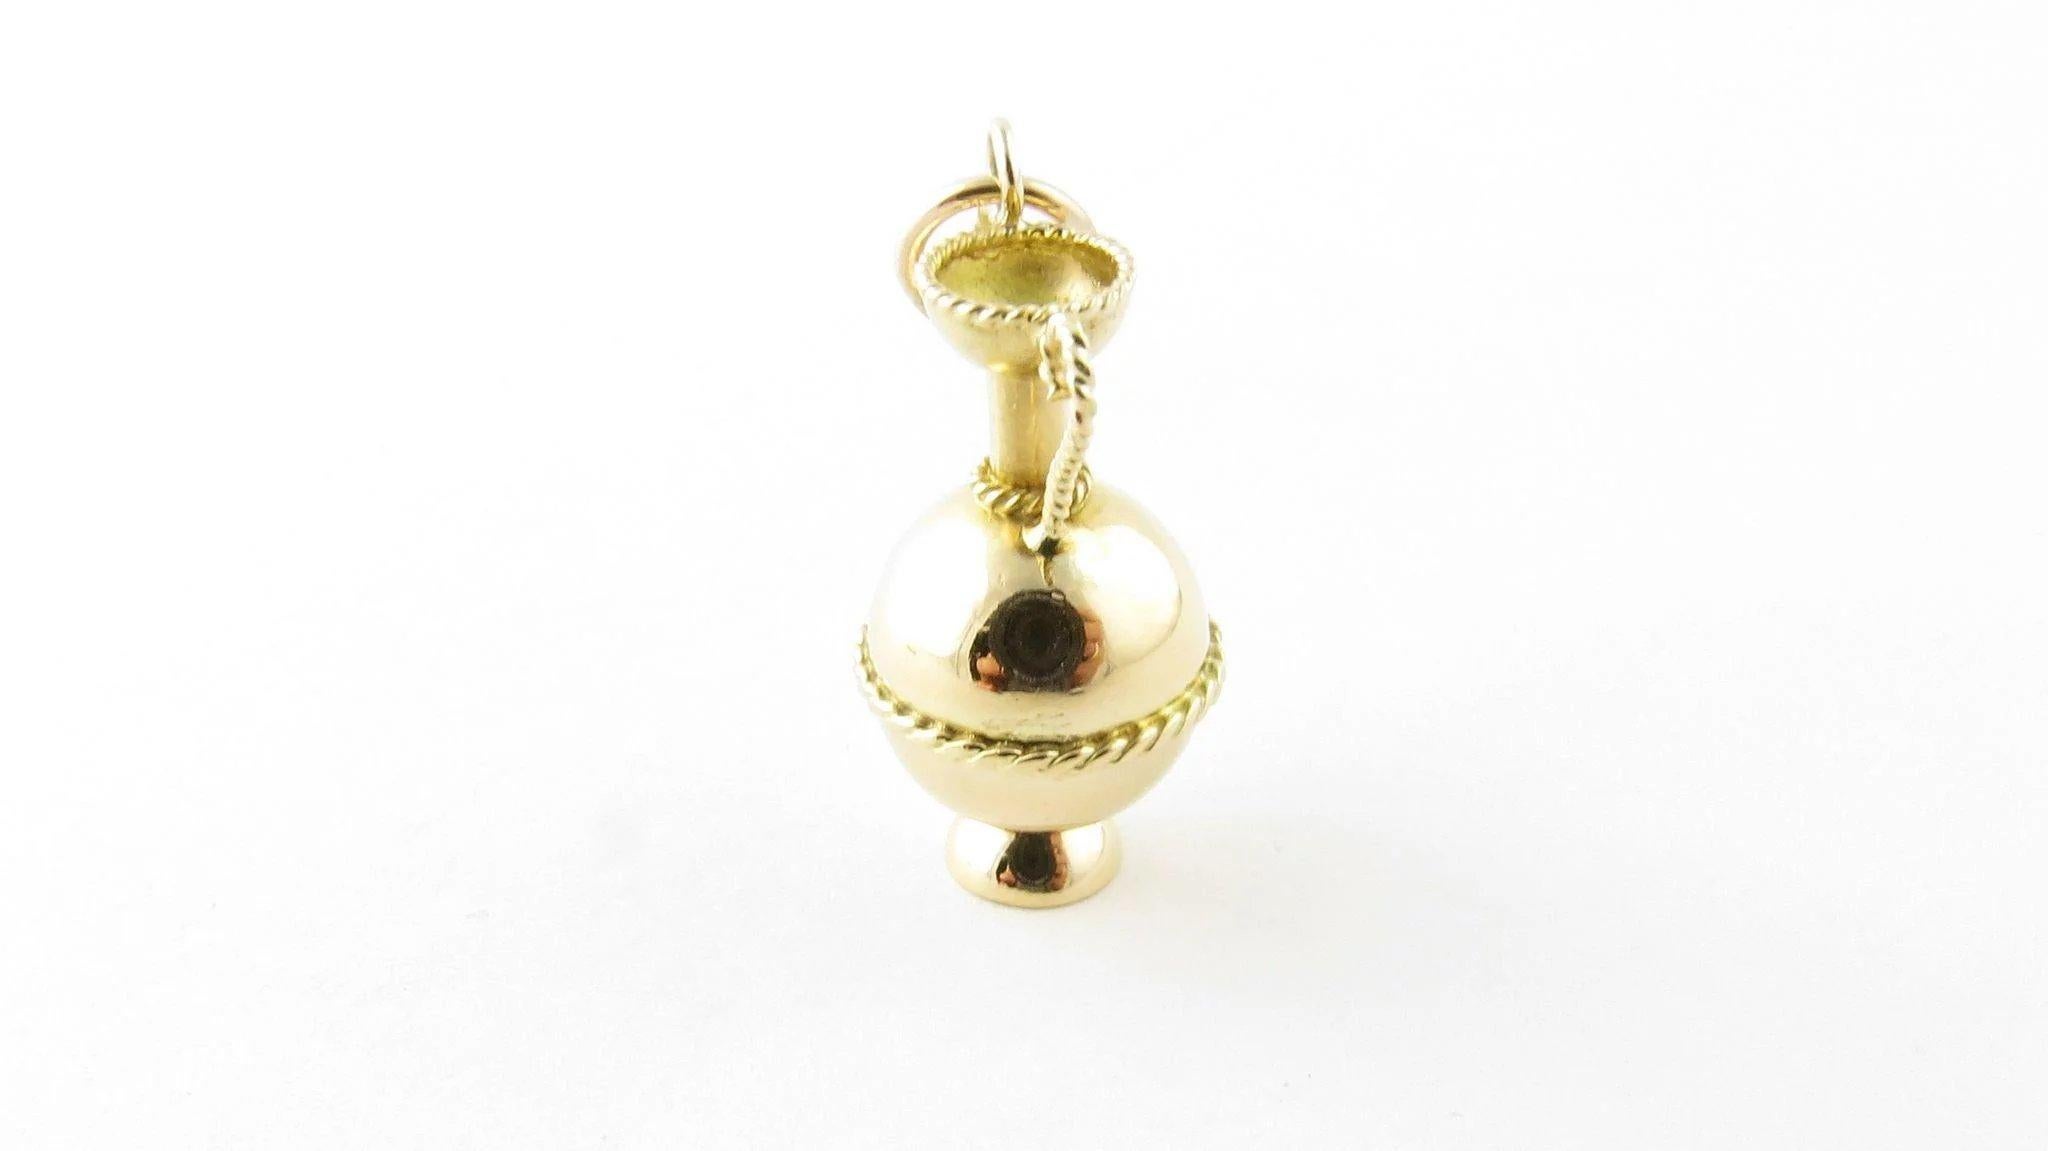 Vintage 14 Karat Yellow Gold Decorative Urn Charm- This lovely 3D charm features a miniature urn meticulously detailed in 14K yellow gold. Size: 21 mm x 12 mm Weight: 1.0 dwt. / 1.7 gr. Stamped: 14K Very good condition, professionally polished.